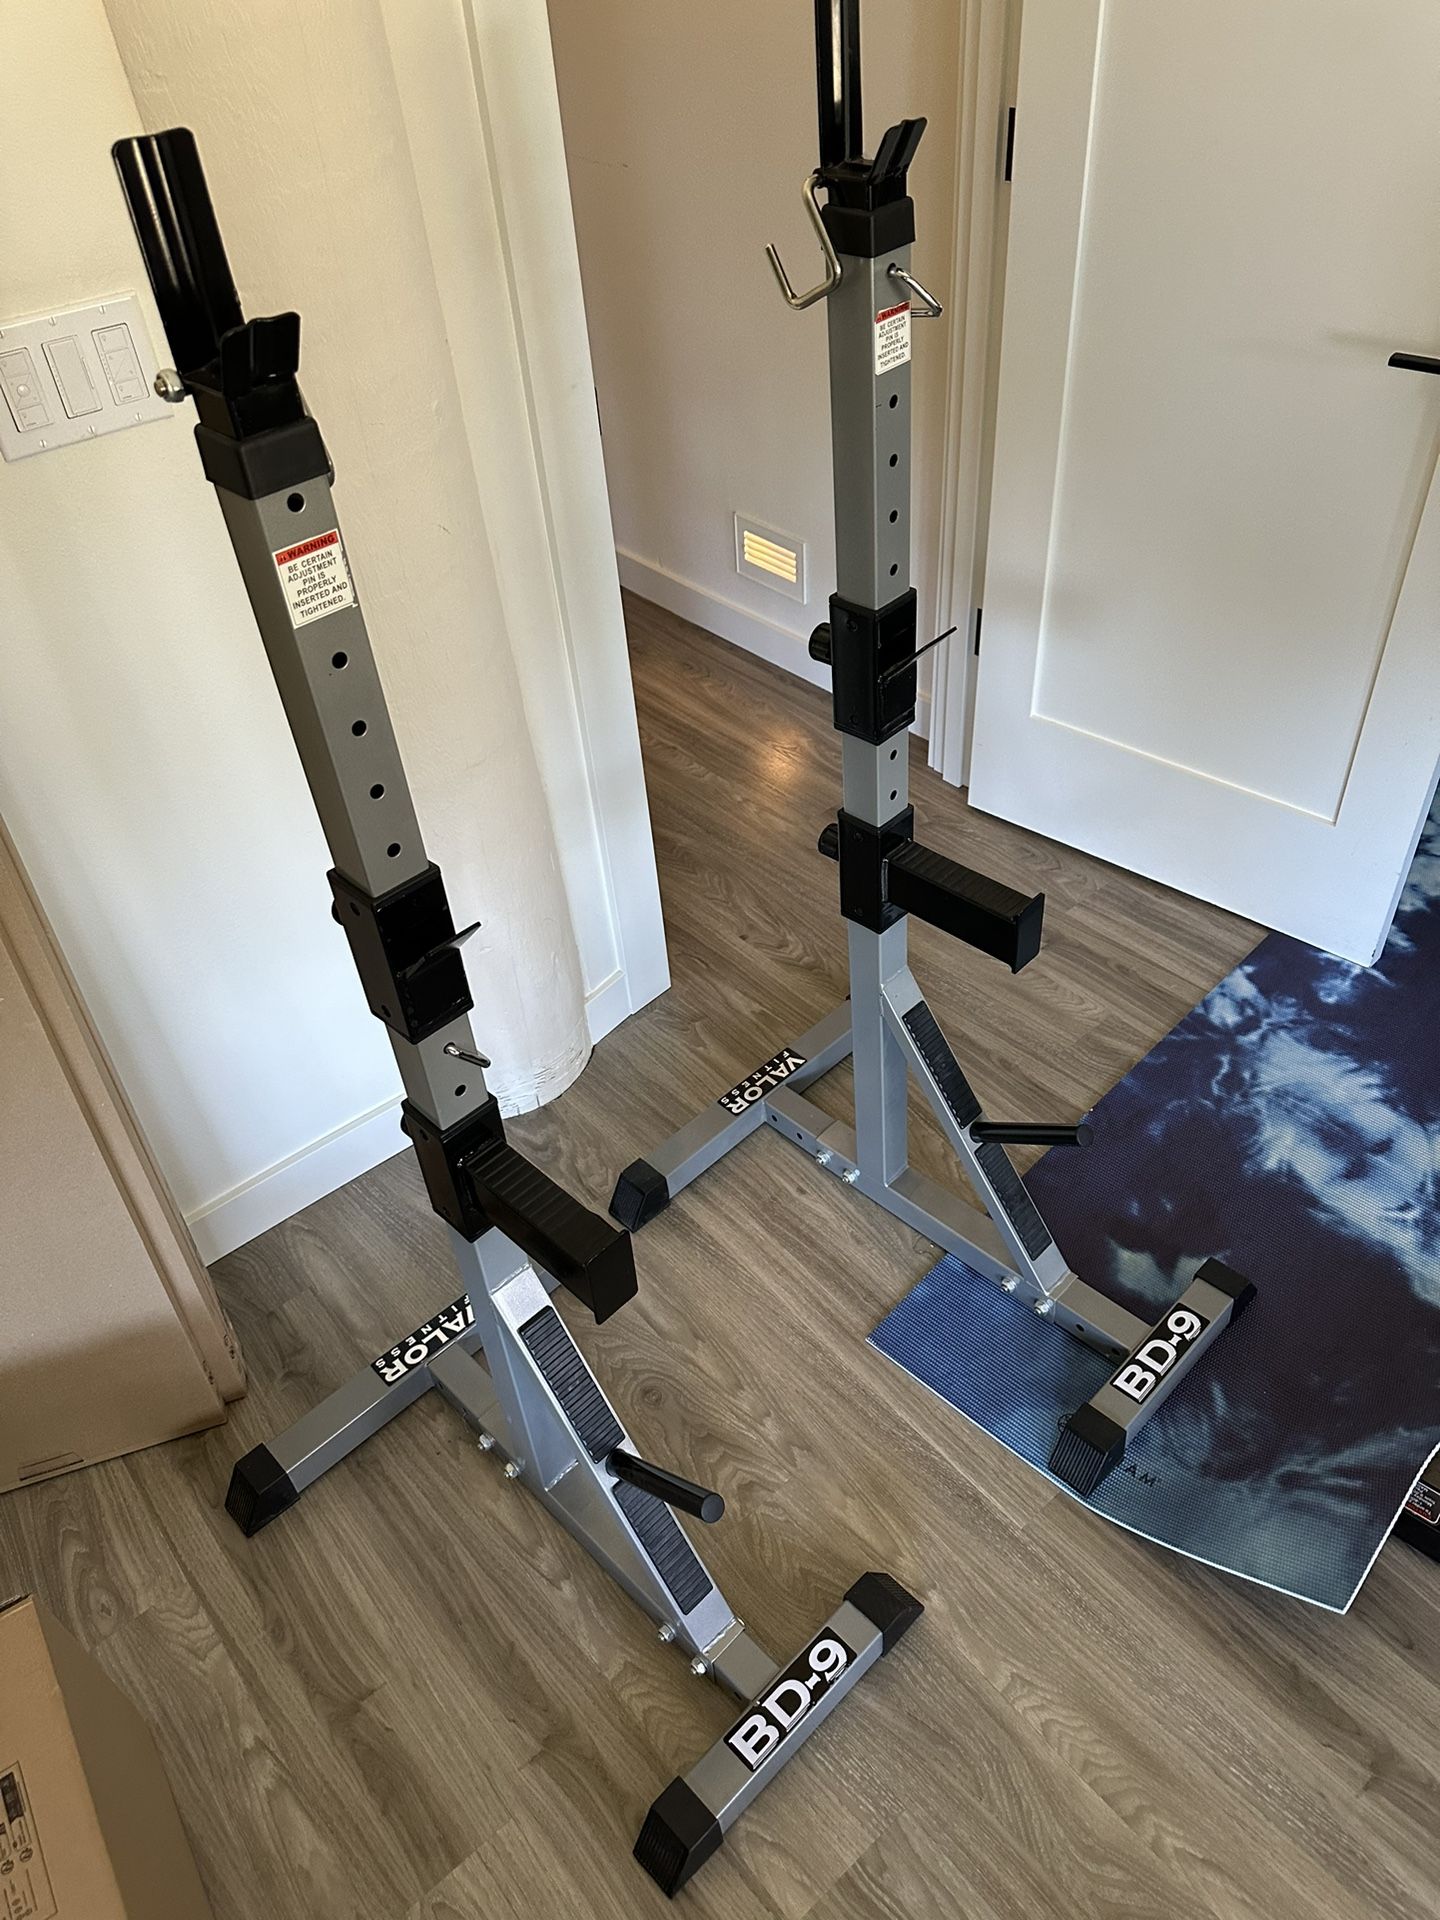 Gym Equipment- Barbell, Bench, Stand & Weights